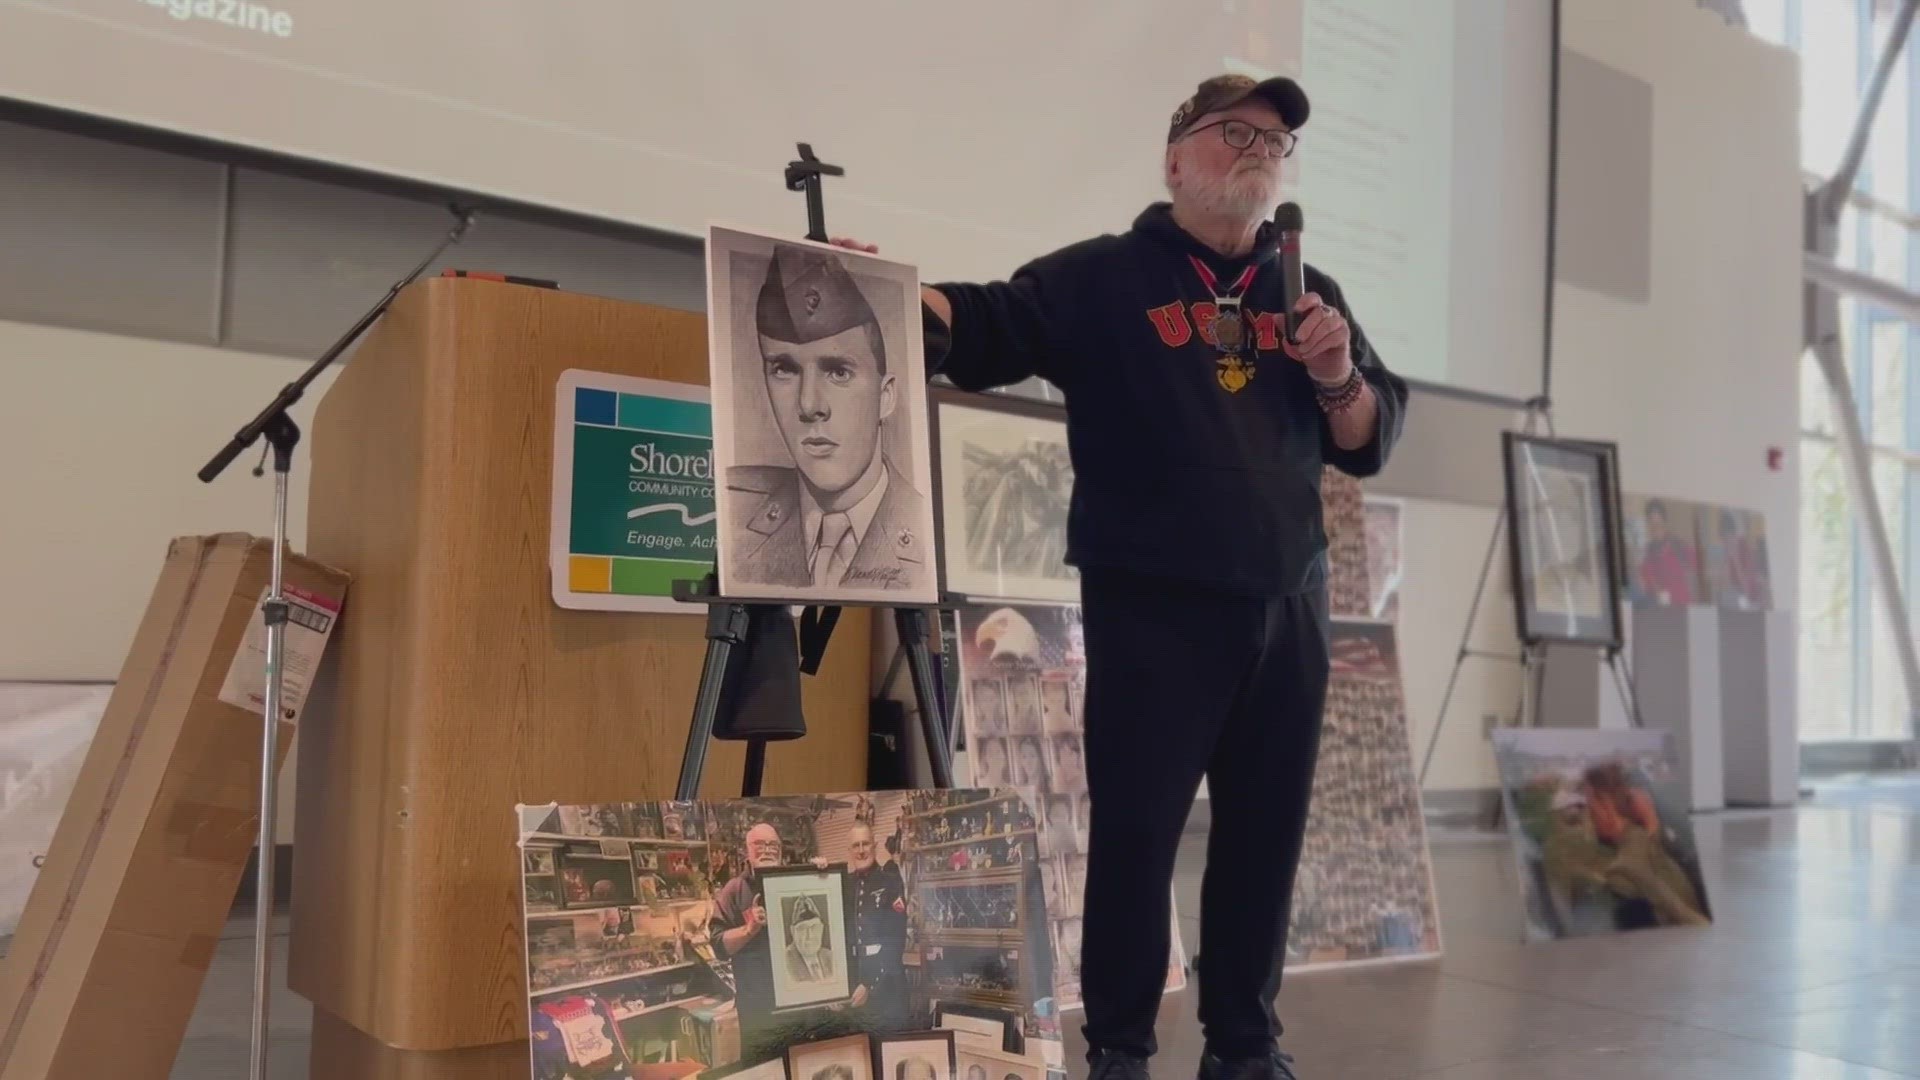 "Painting Away the Trauma II" features creative works illustrating what the military experience was like for veterans as well as pieces by artist Michael Reagan.